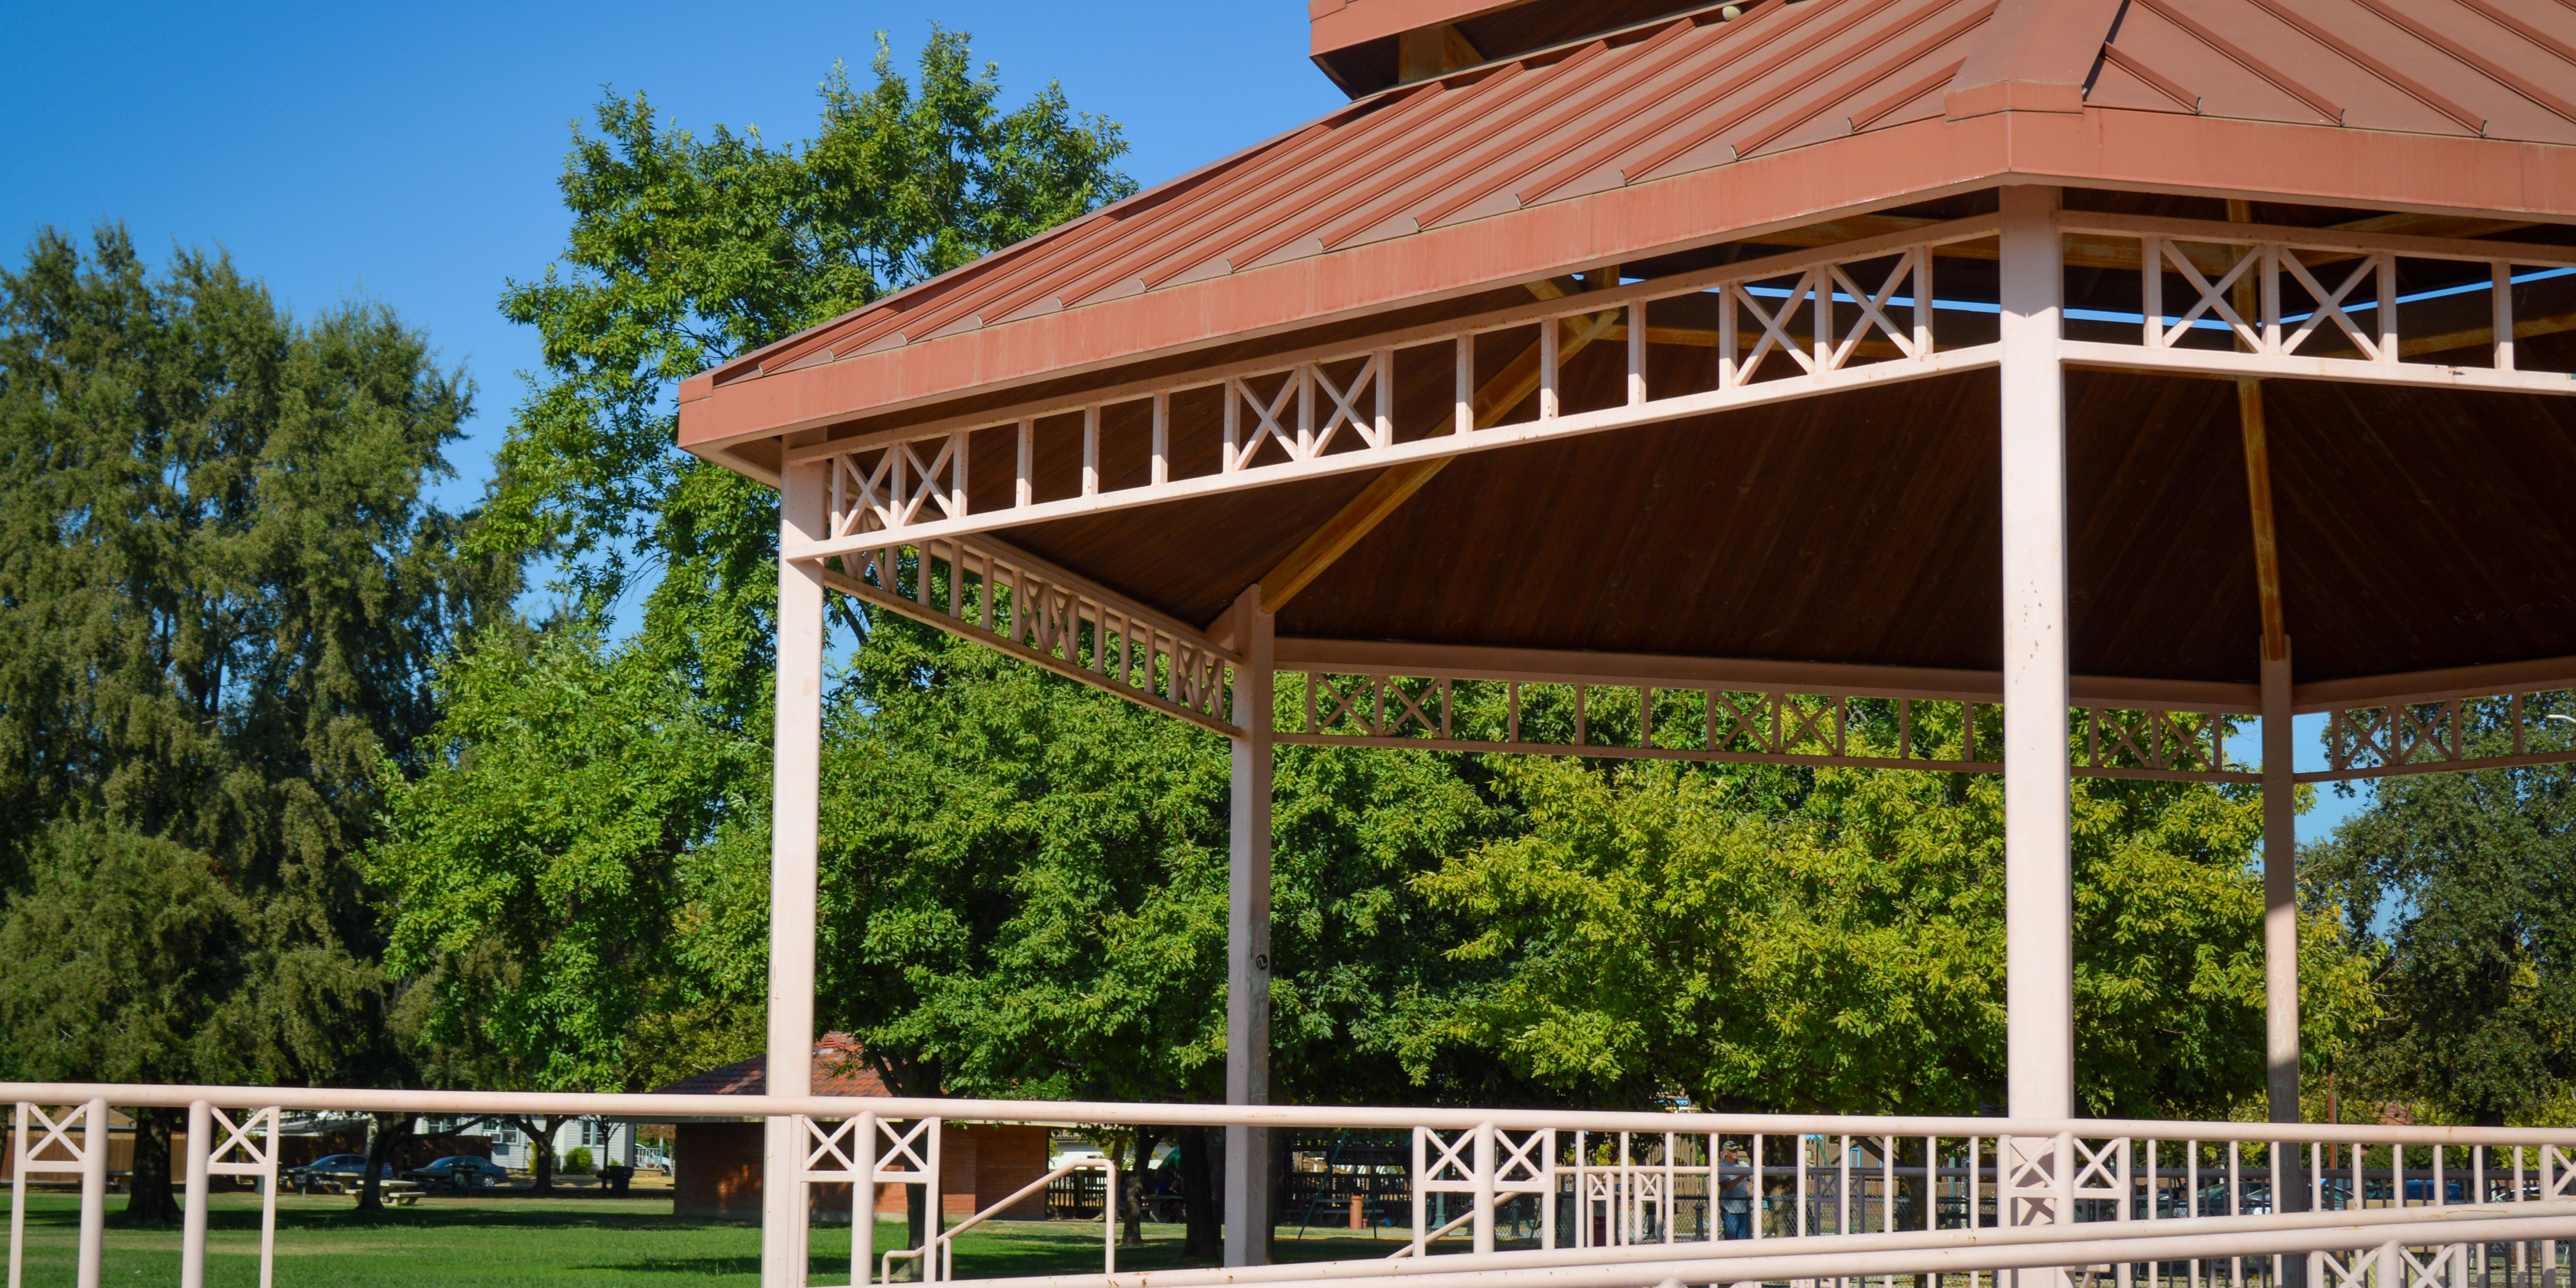 Red shade structure with blue skies and green trees